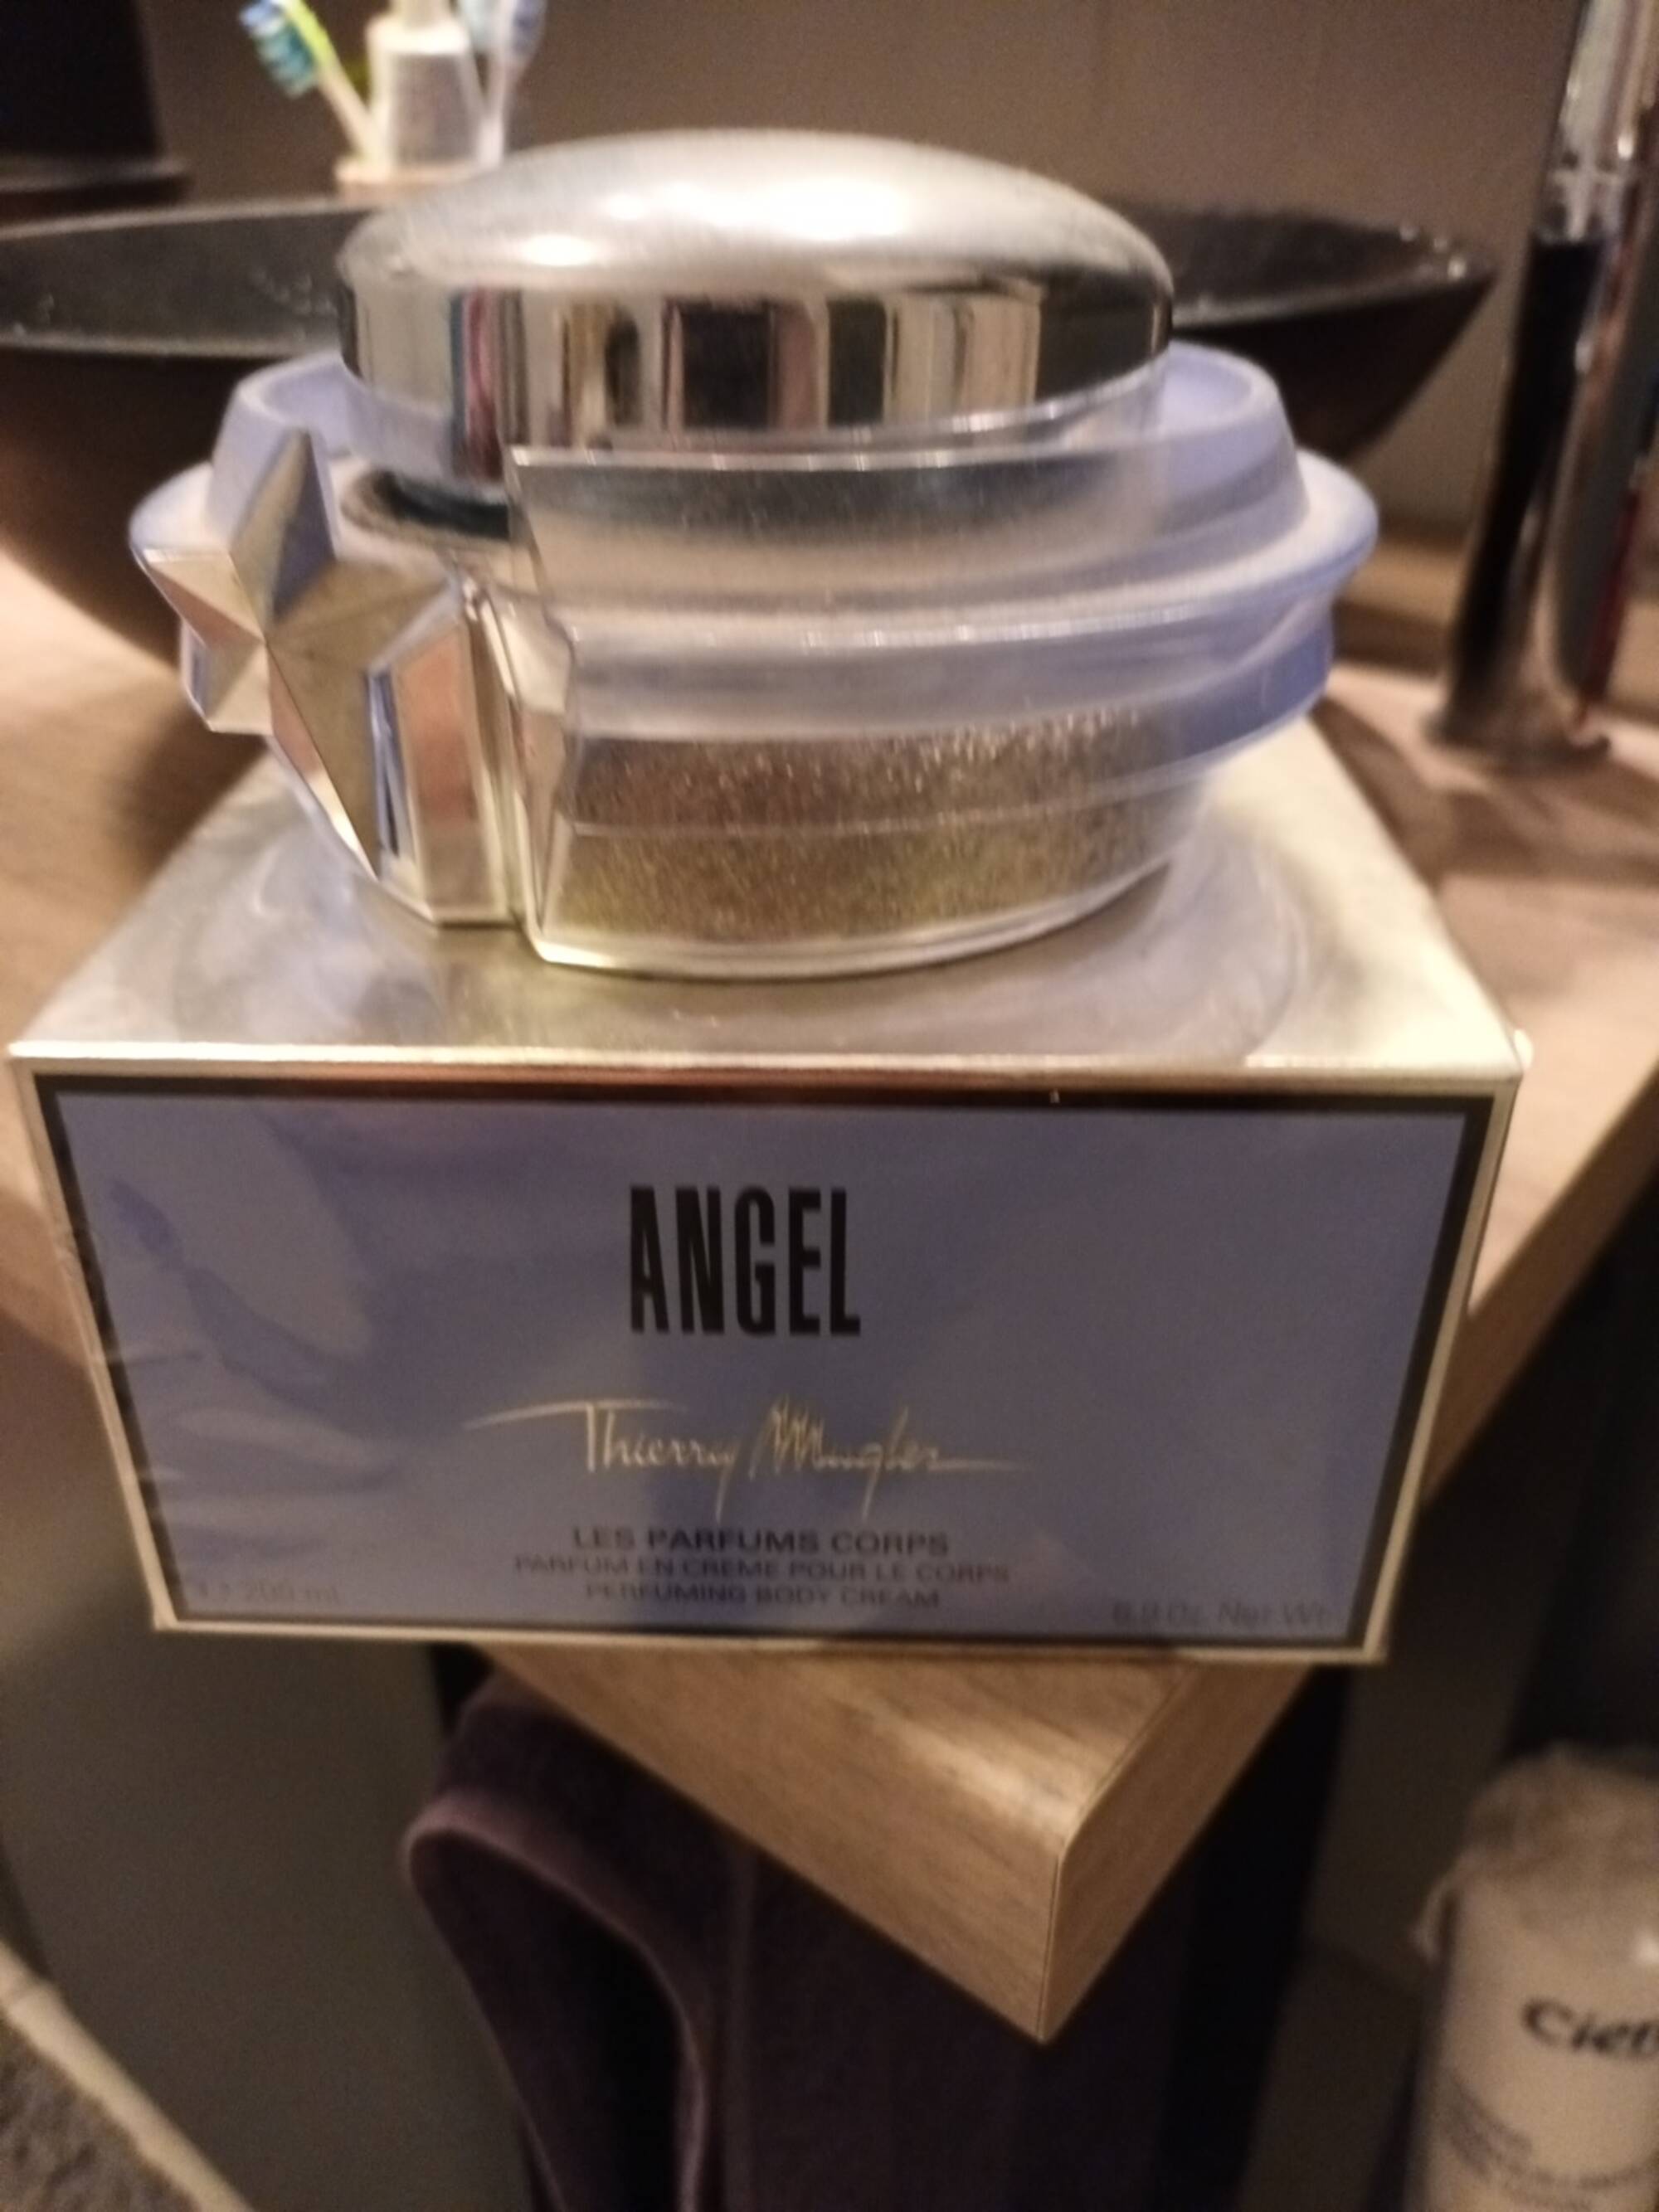 THIERRY MUGLER - Angel - Les parfums corps